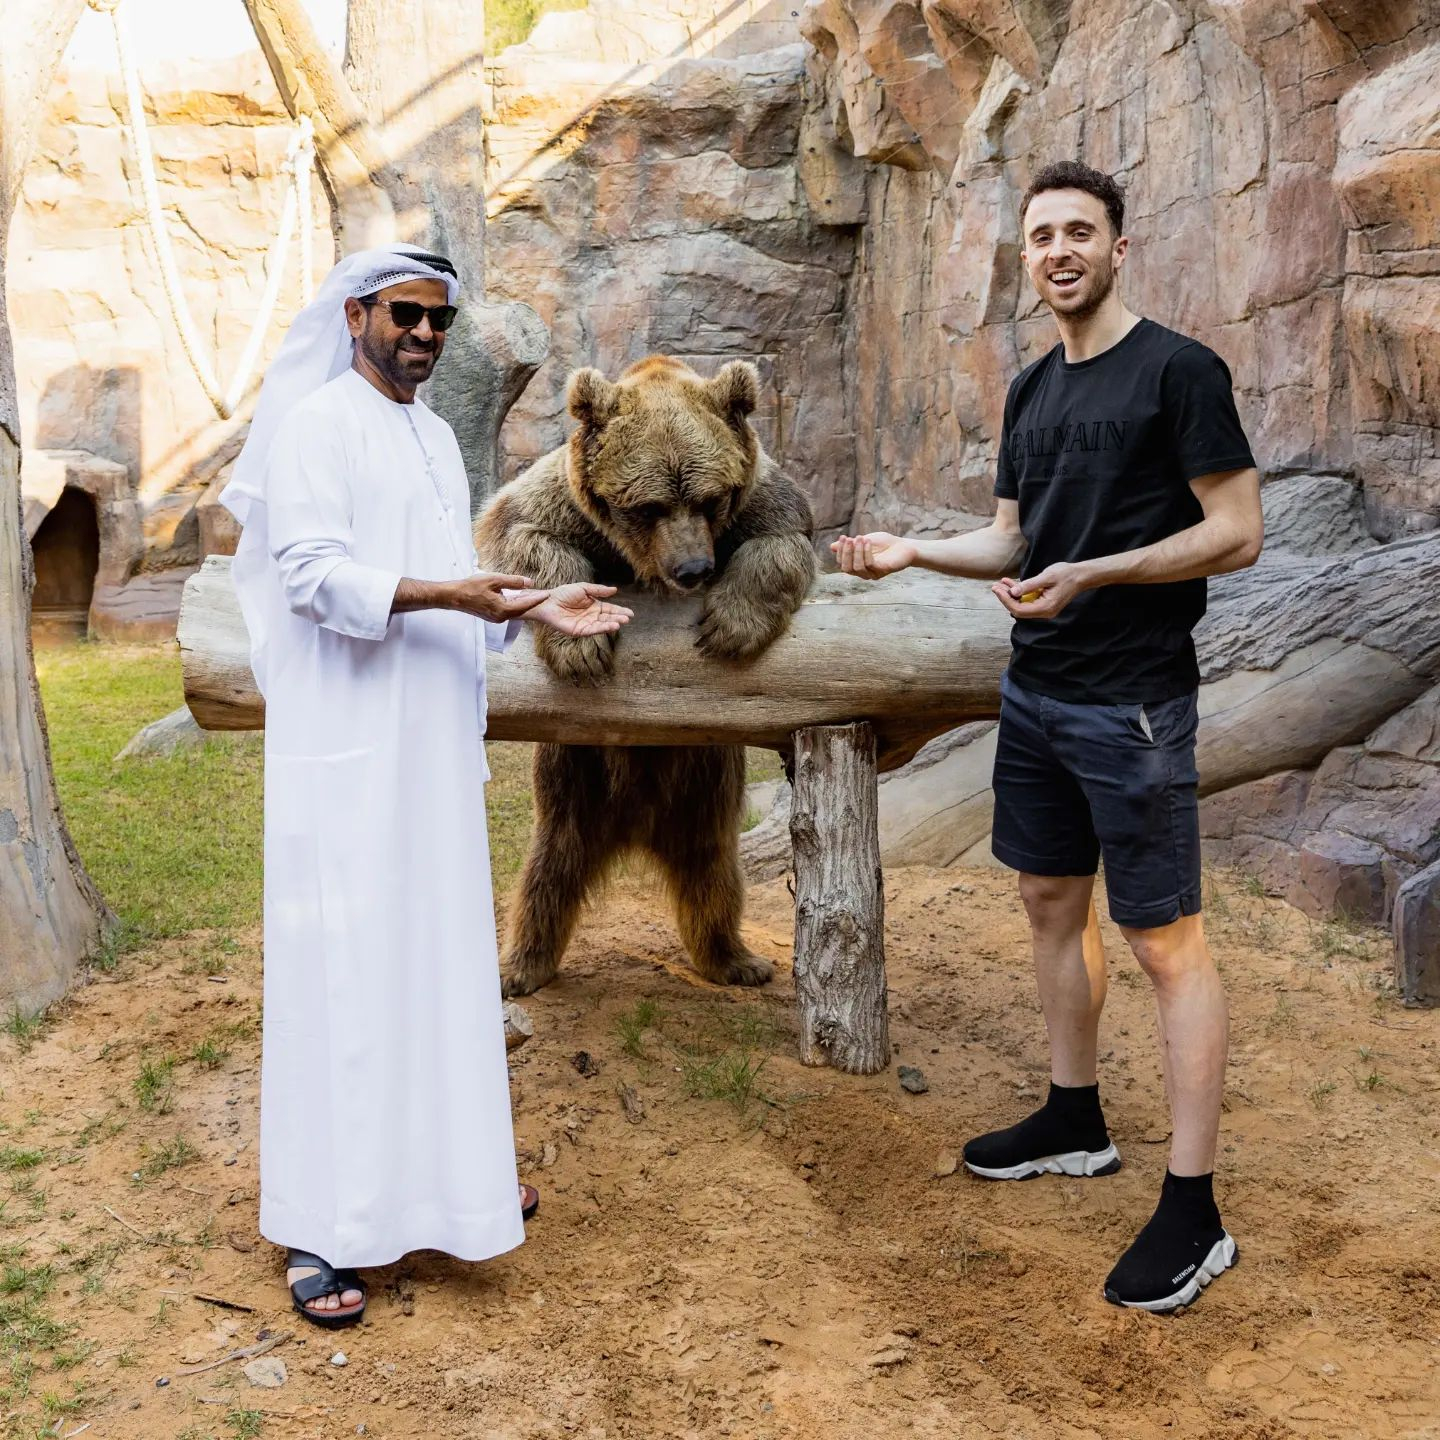 Jota visited Rashed Belhasa's exclusive zoo in Dubai, and got up-close and personal with the exotic animals